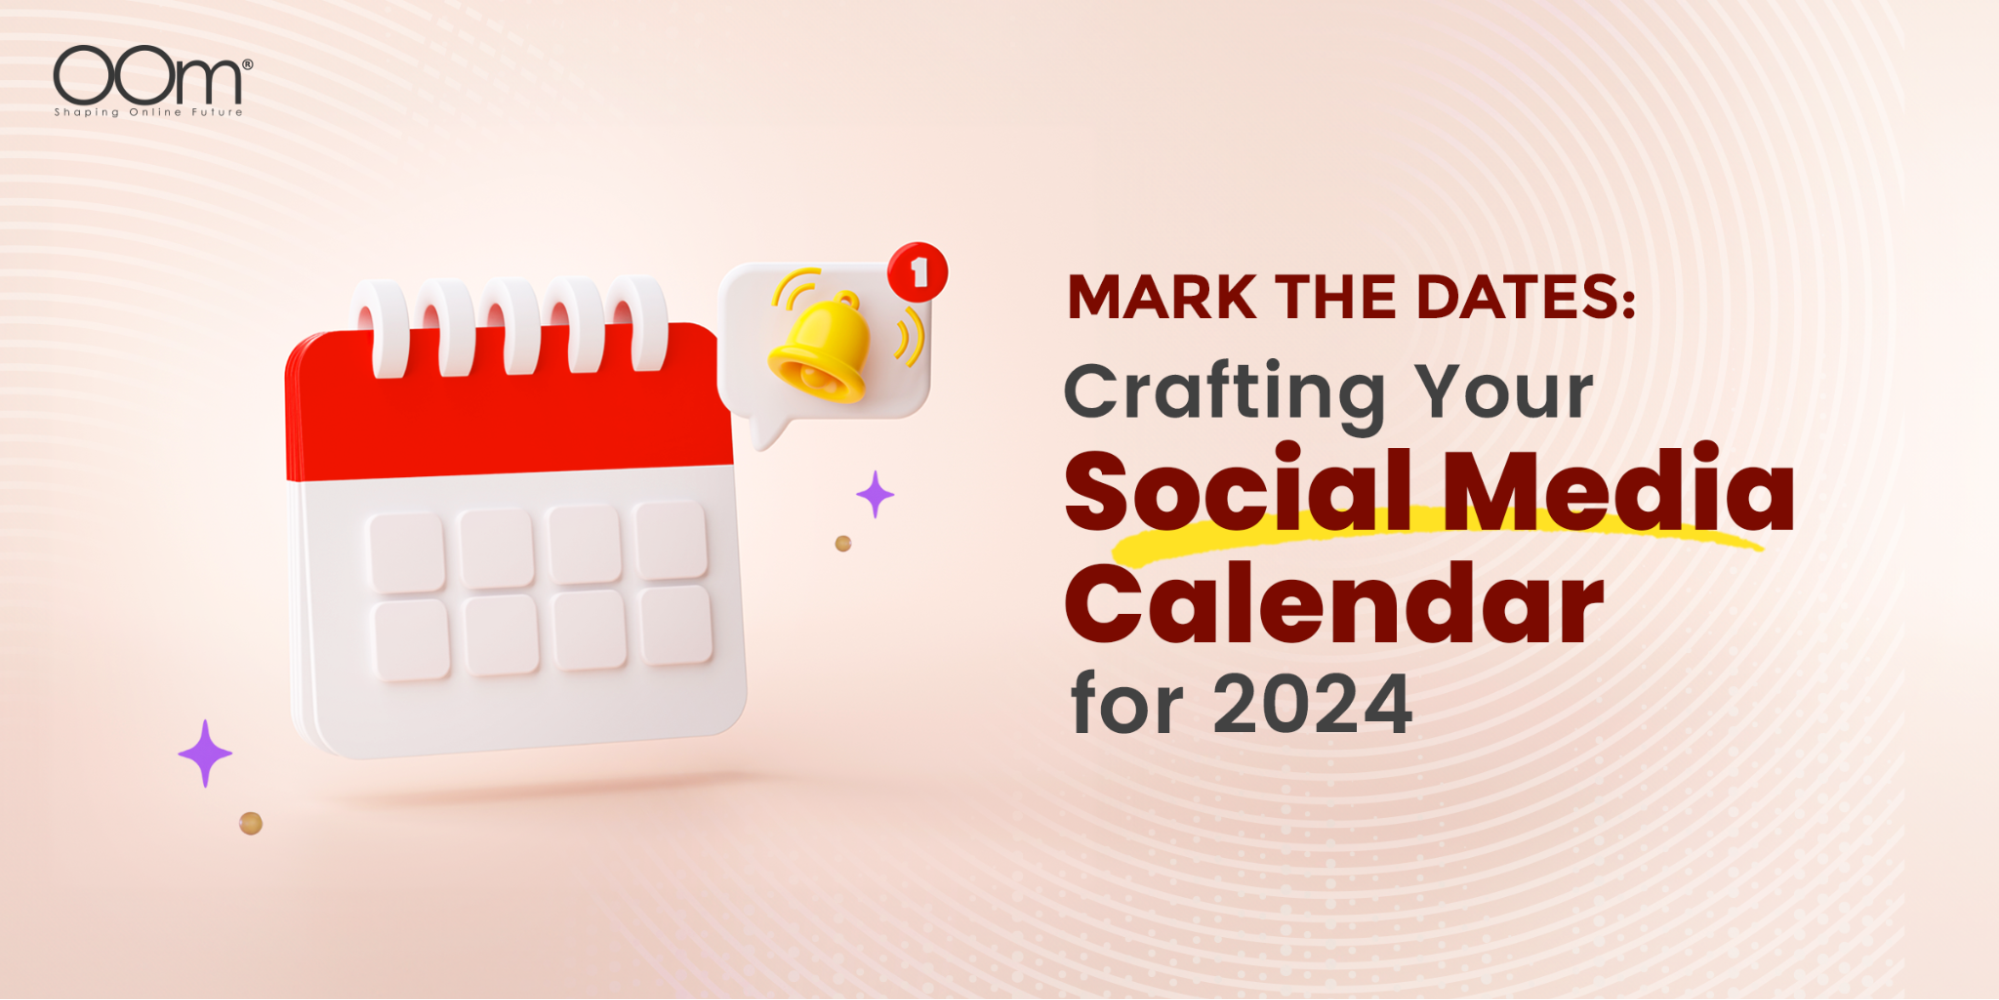 Mark The Dates: Crafting Your Social Media Calendar for 2024